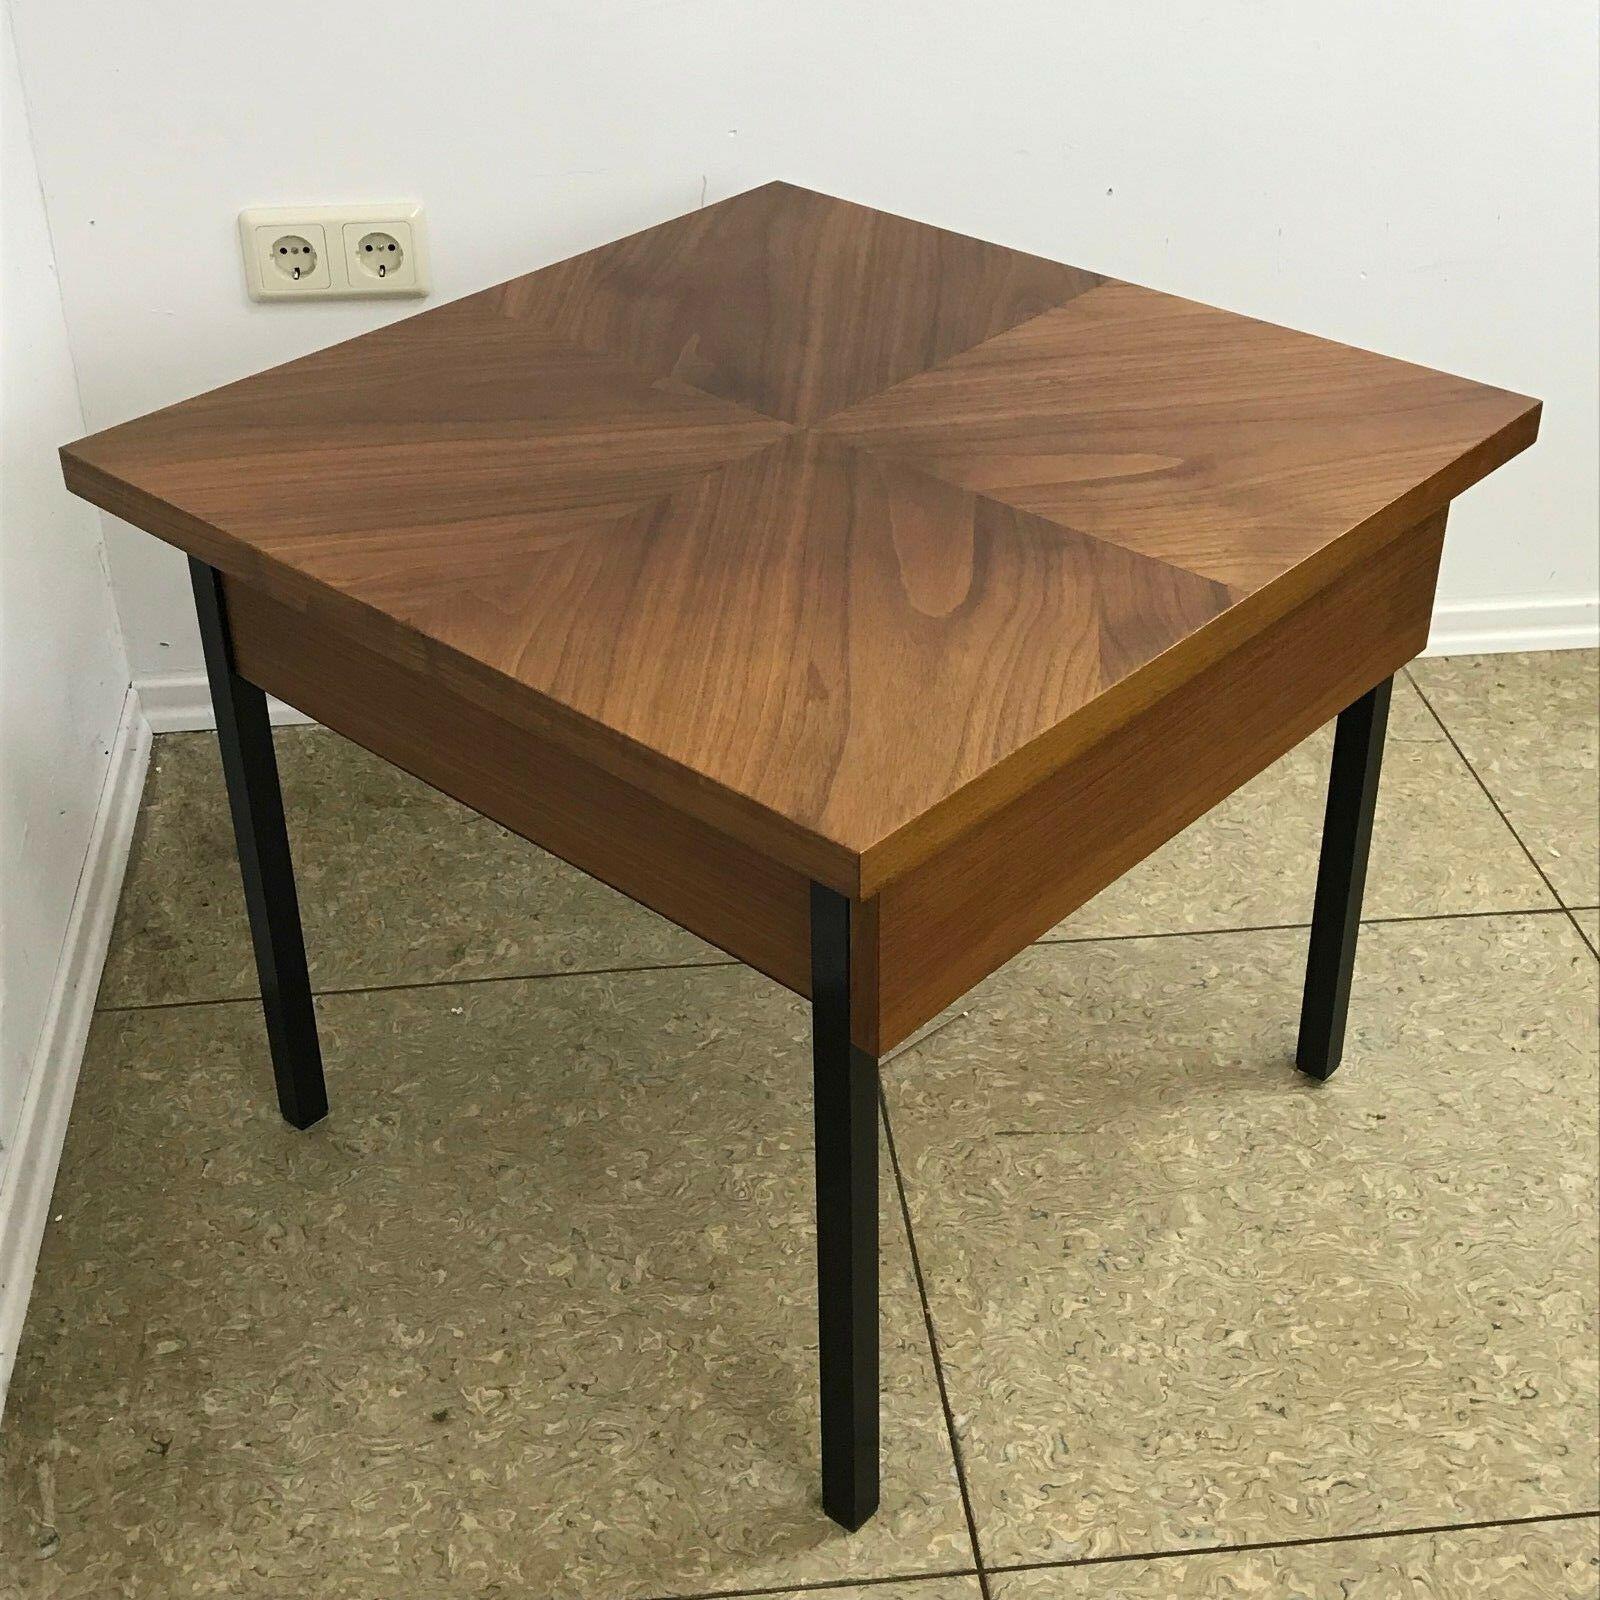 60s 70s Teak sewing box sewing table Utensilio coffee table mid century 60s

Object: sewing table

Manufacturer:

Condition: good

Age: around 1960-1970

Dimensions:

65cm x 65cm x 55cm

Other notes:

The pictures serve as part of